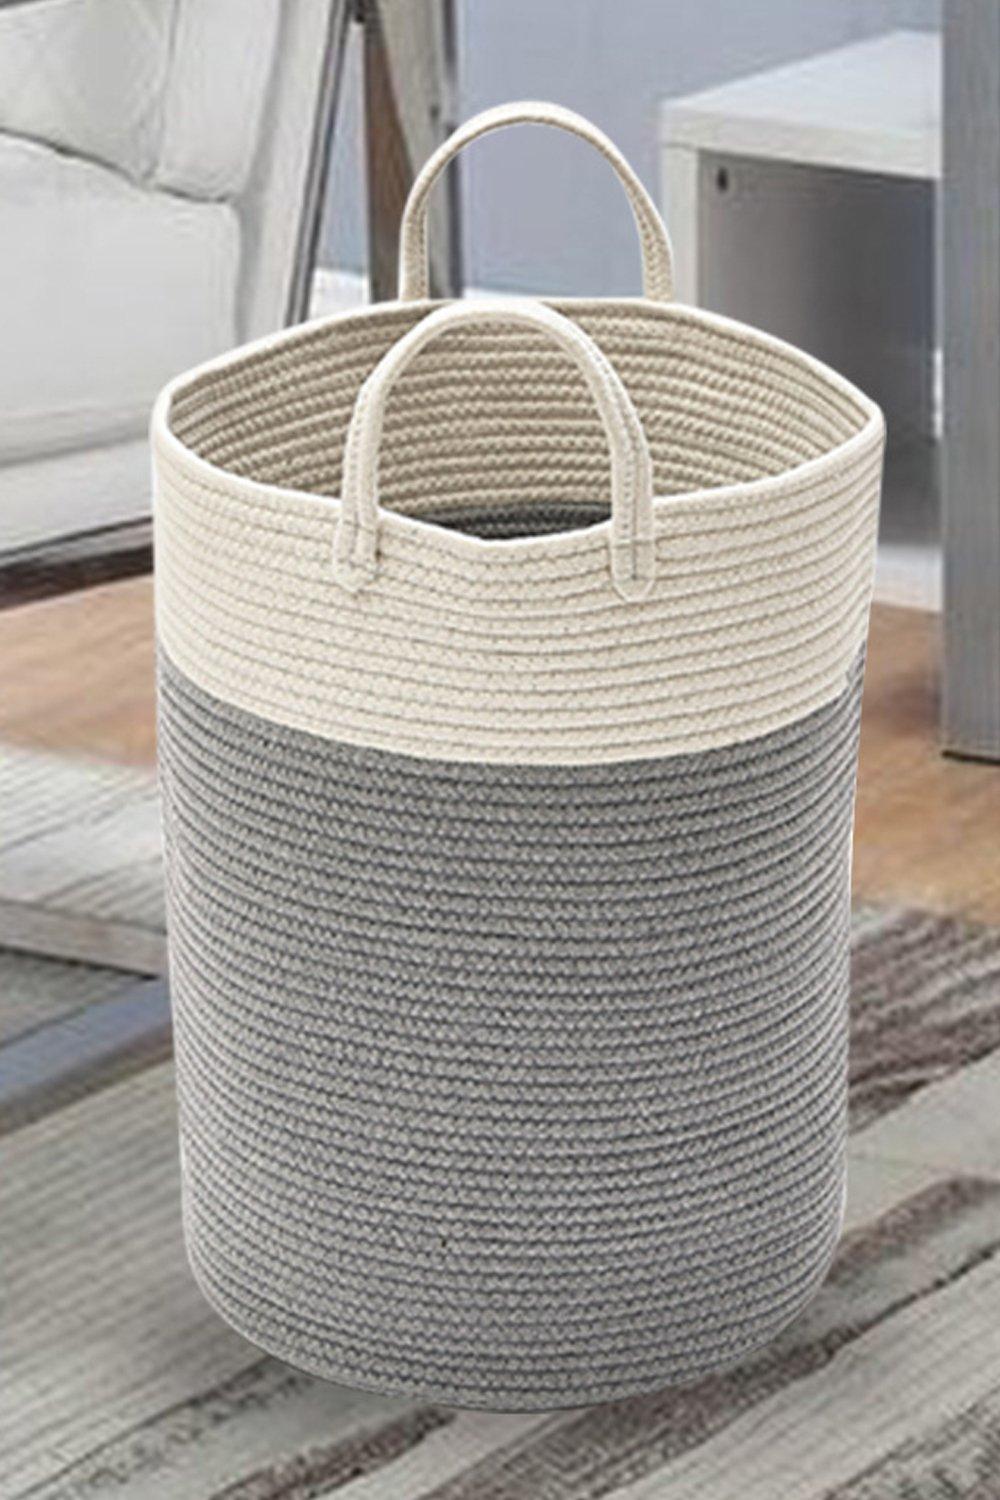 63L Woven Cotton Thread Laundry Clothes Hamper Basket Baby Kids Toys Storage with Handlers 50cm H